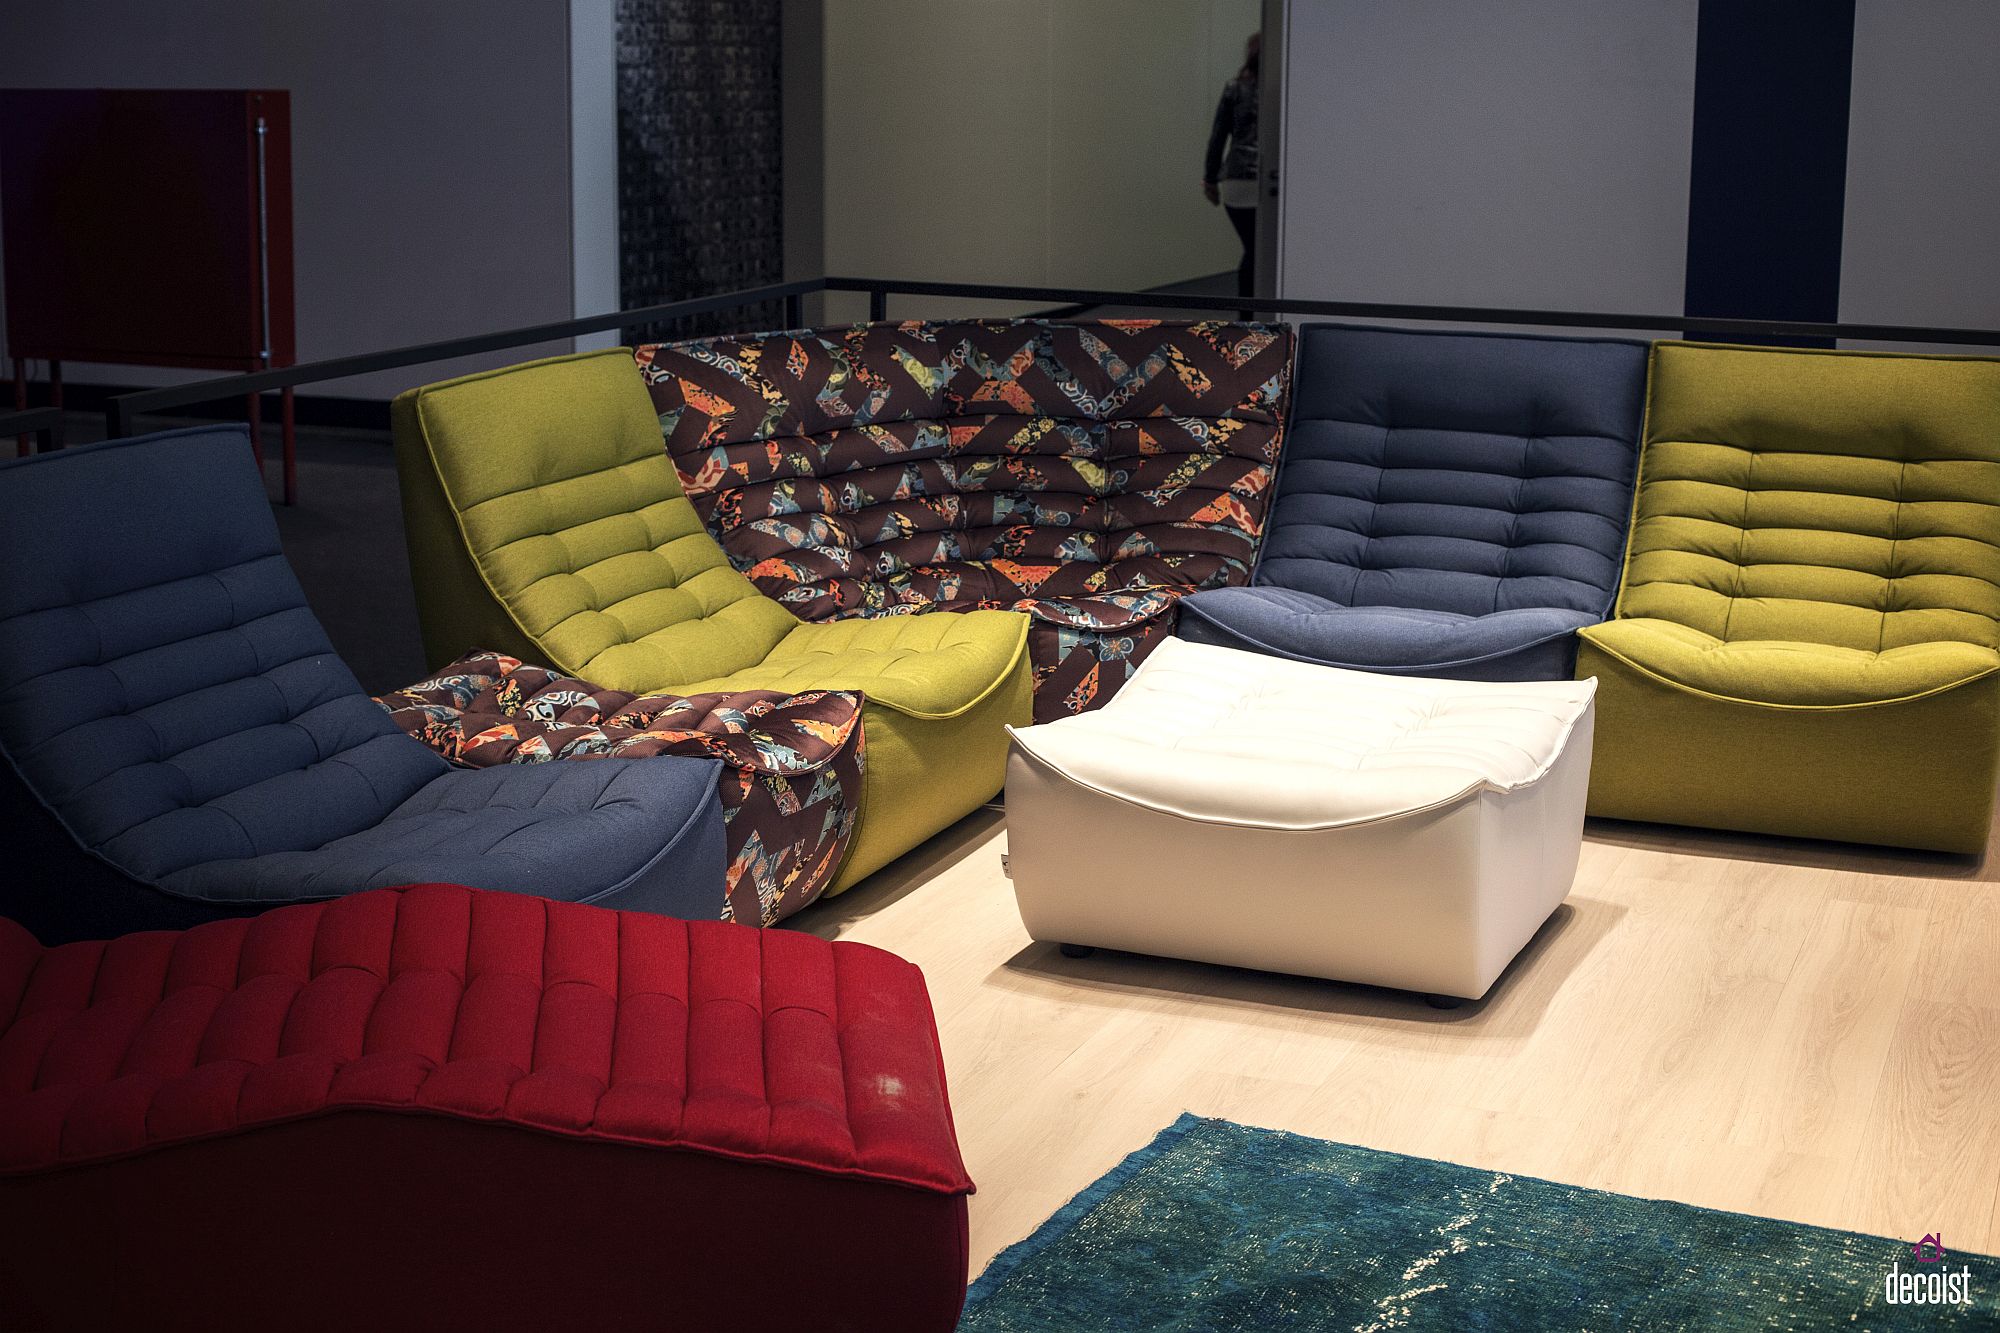 Adding color and pattern to the living room with modular sofa units from Calia Italia